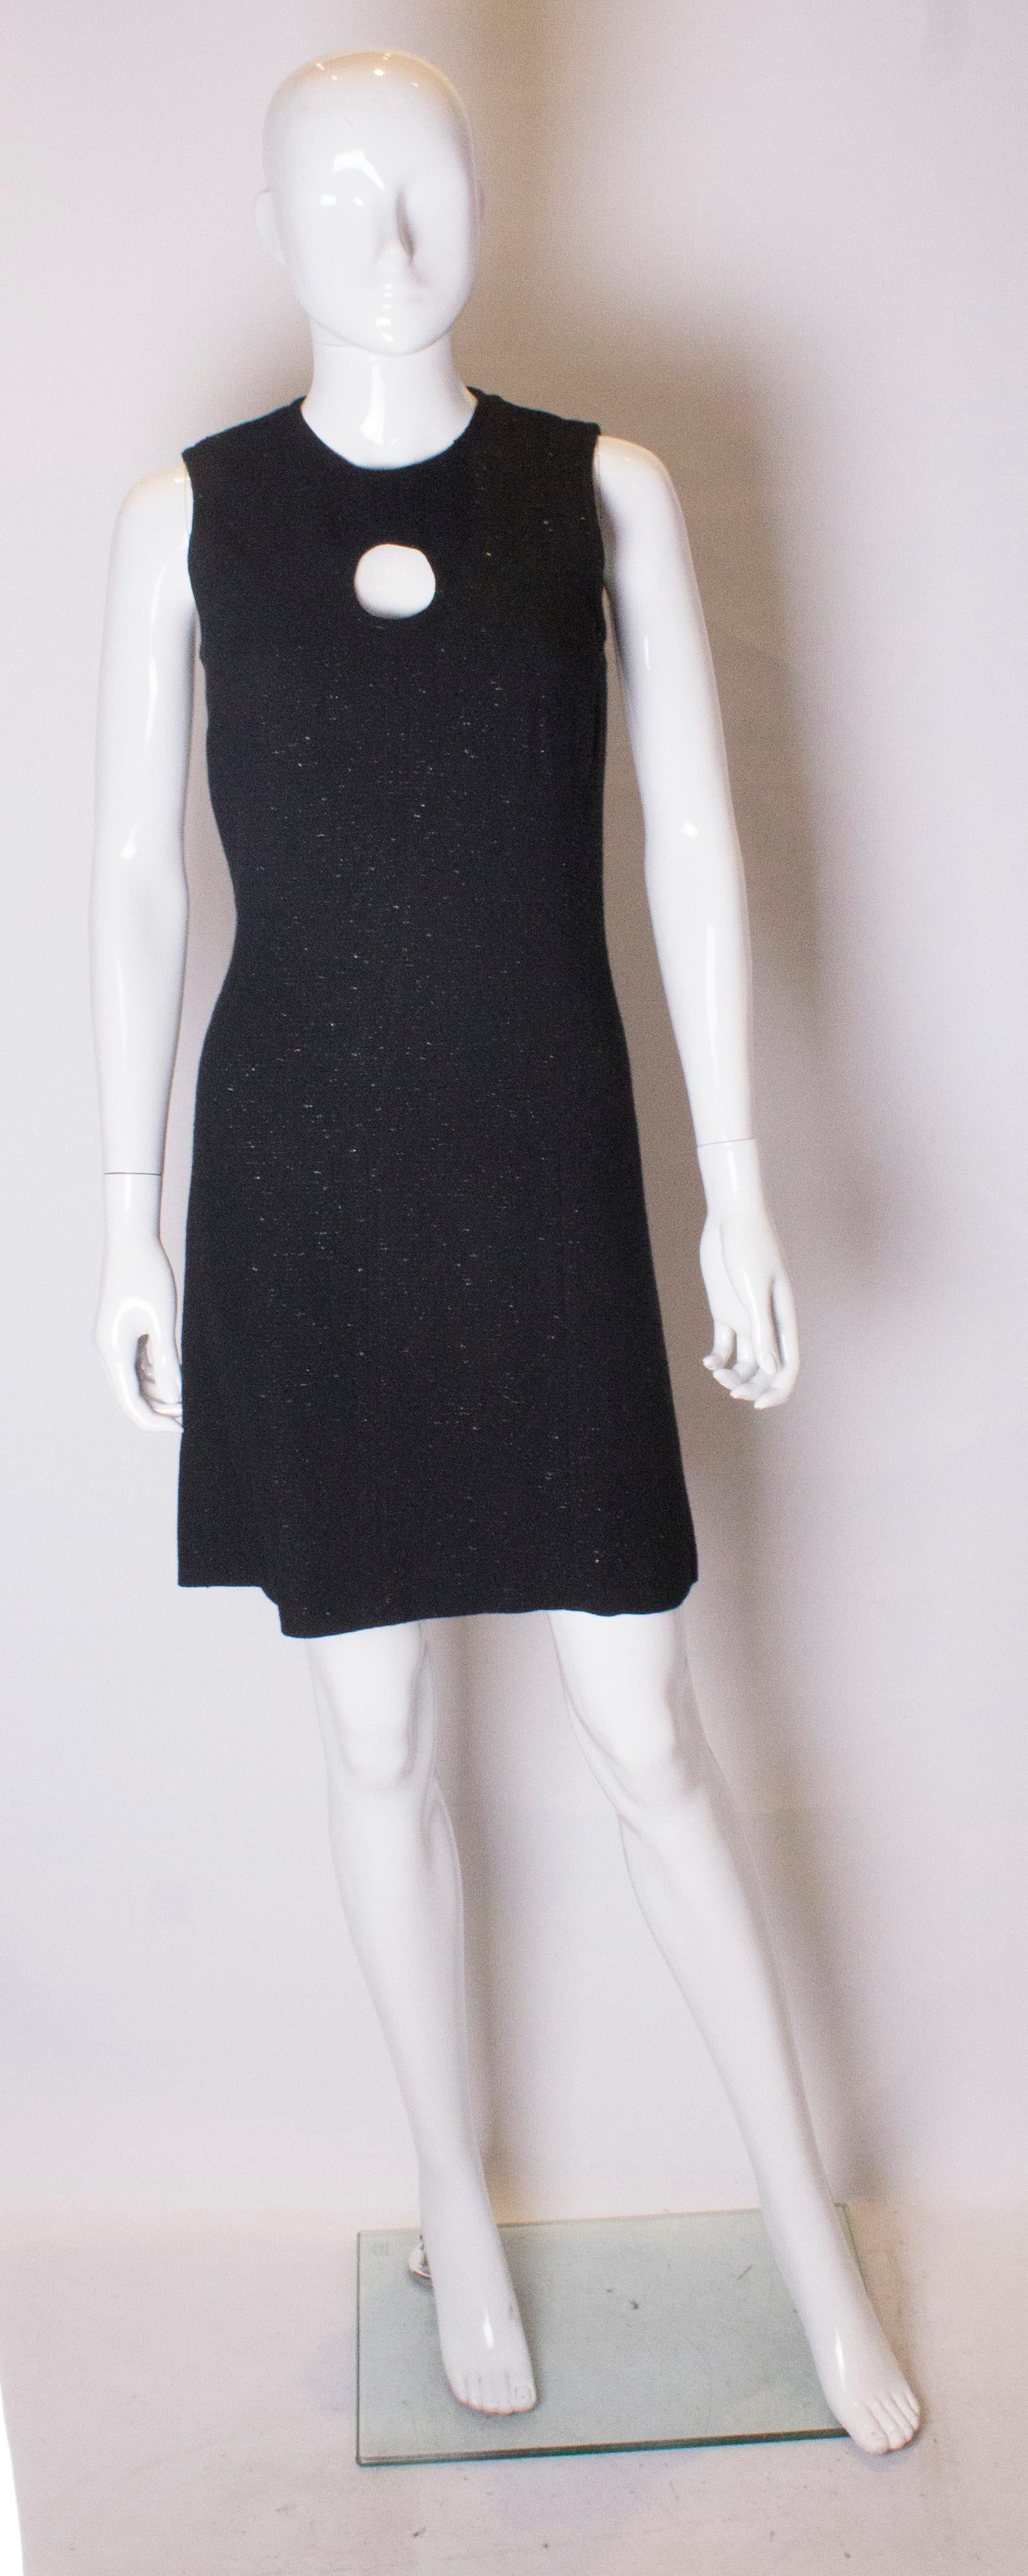 A chic party dress by Tomasz Starzewski. In a black wool with silver thread detail , this dress is a real head turner. It is beautifully cut and has a central back zip and keyhole detail at the front.